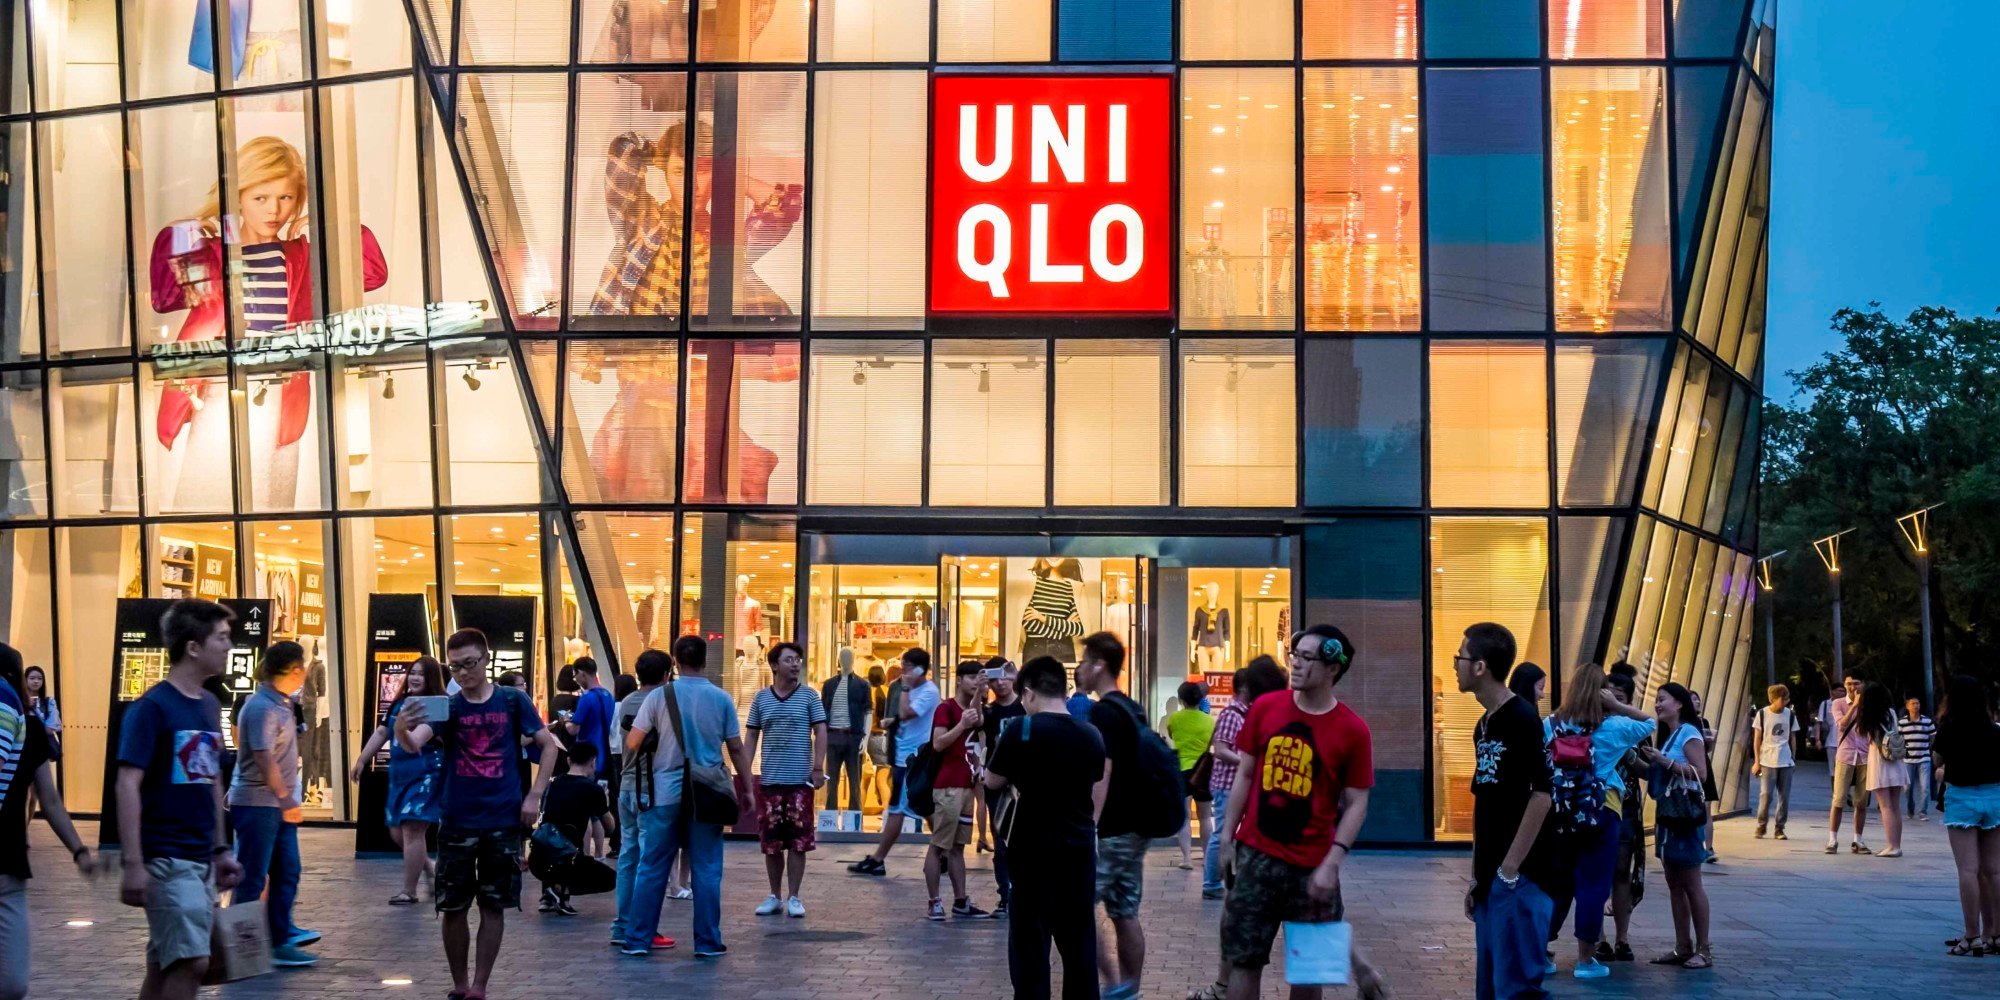 BEIJING, CHINA - JULY 15: (CHINA OUT) People walk by a Uniqlo outlet at Sanlitun after a sex video taken in what appears to be a Uniqlo store fitting room spread online on July 15, 2015 in Beijing, China. The video shot by a smartphone showed a young couple having sex in what appears to be a Uniqlo store fitting room. The Cyberspace Administration of China urged Sina and Tencent to increase their awareness of social responsibility, strengthen management and cooperate with the authority in investigating the case. (Photo by ChinaFotoPress/ChinaFotoPress via Getty Images)